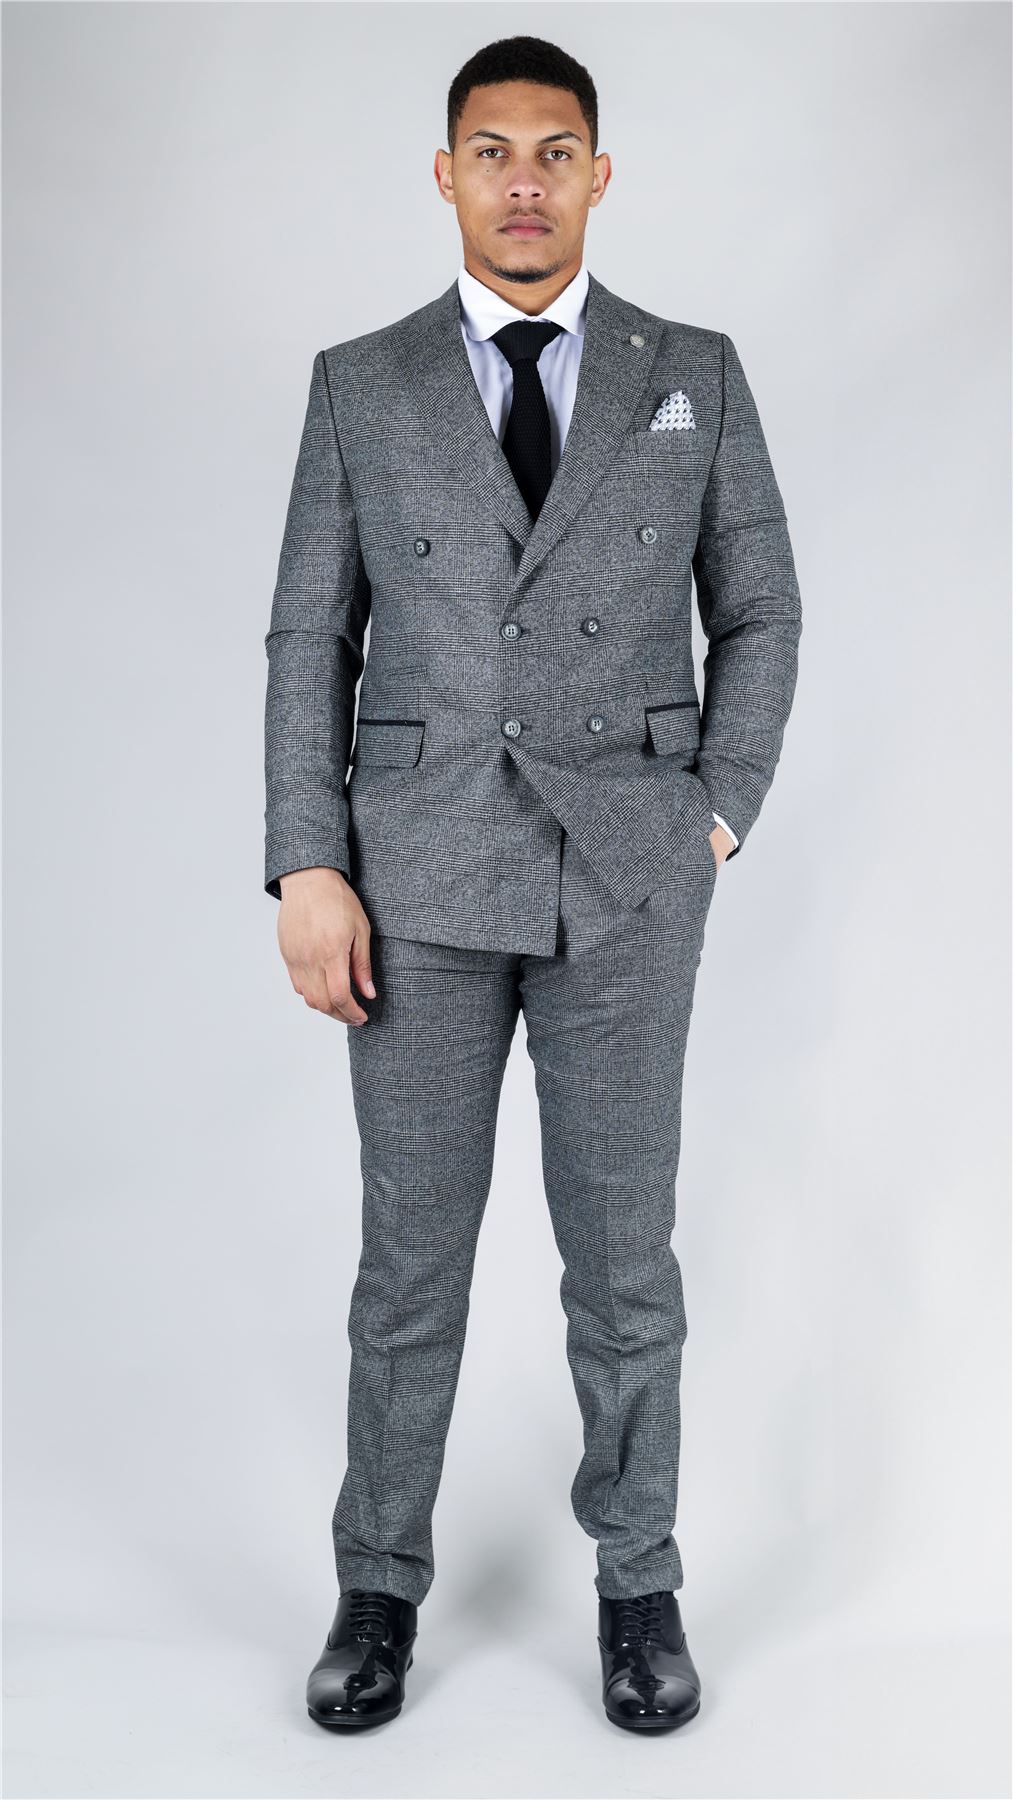 Men's Grey Suit 2 Piece Double Breasted Check Formal Dress